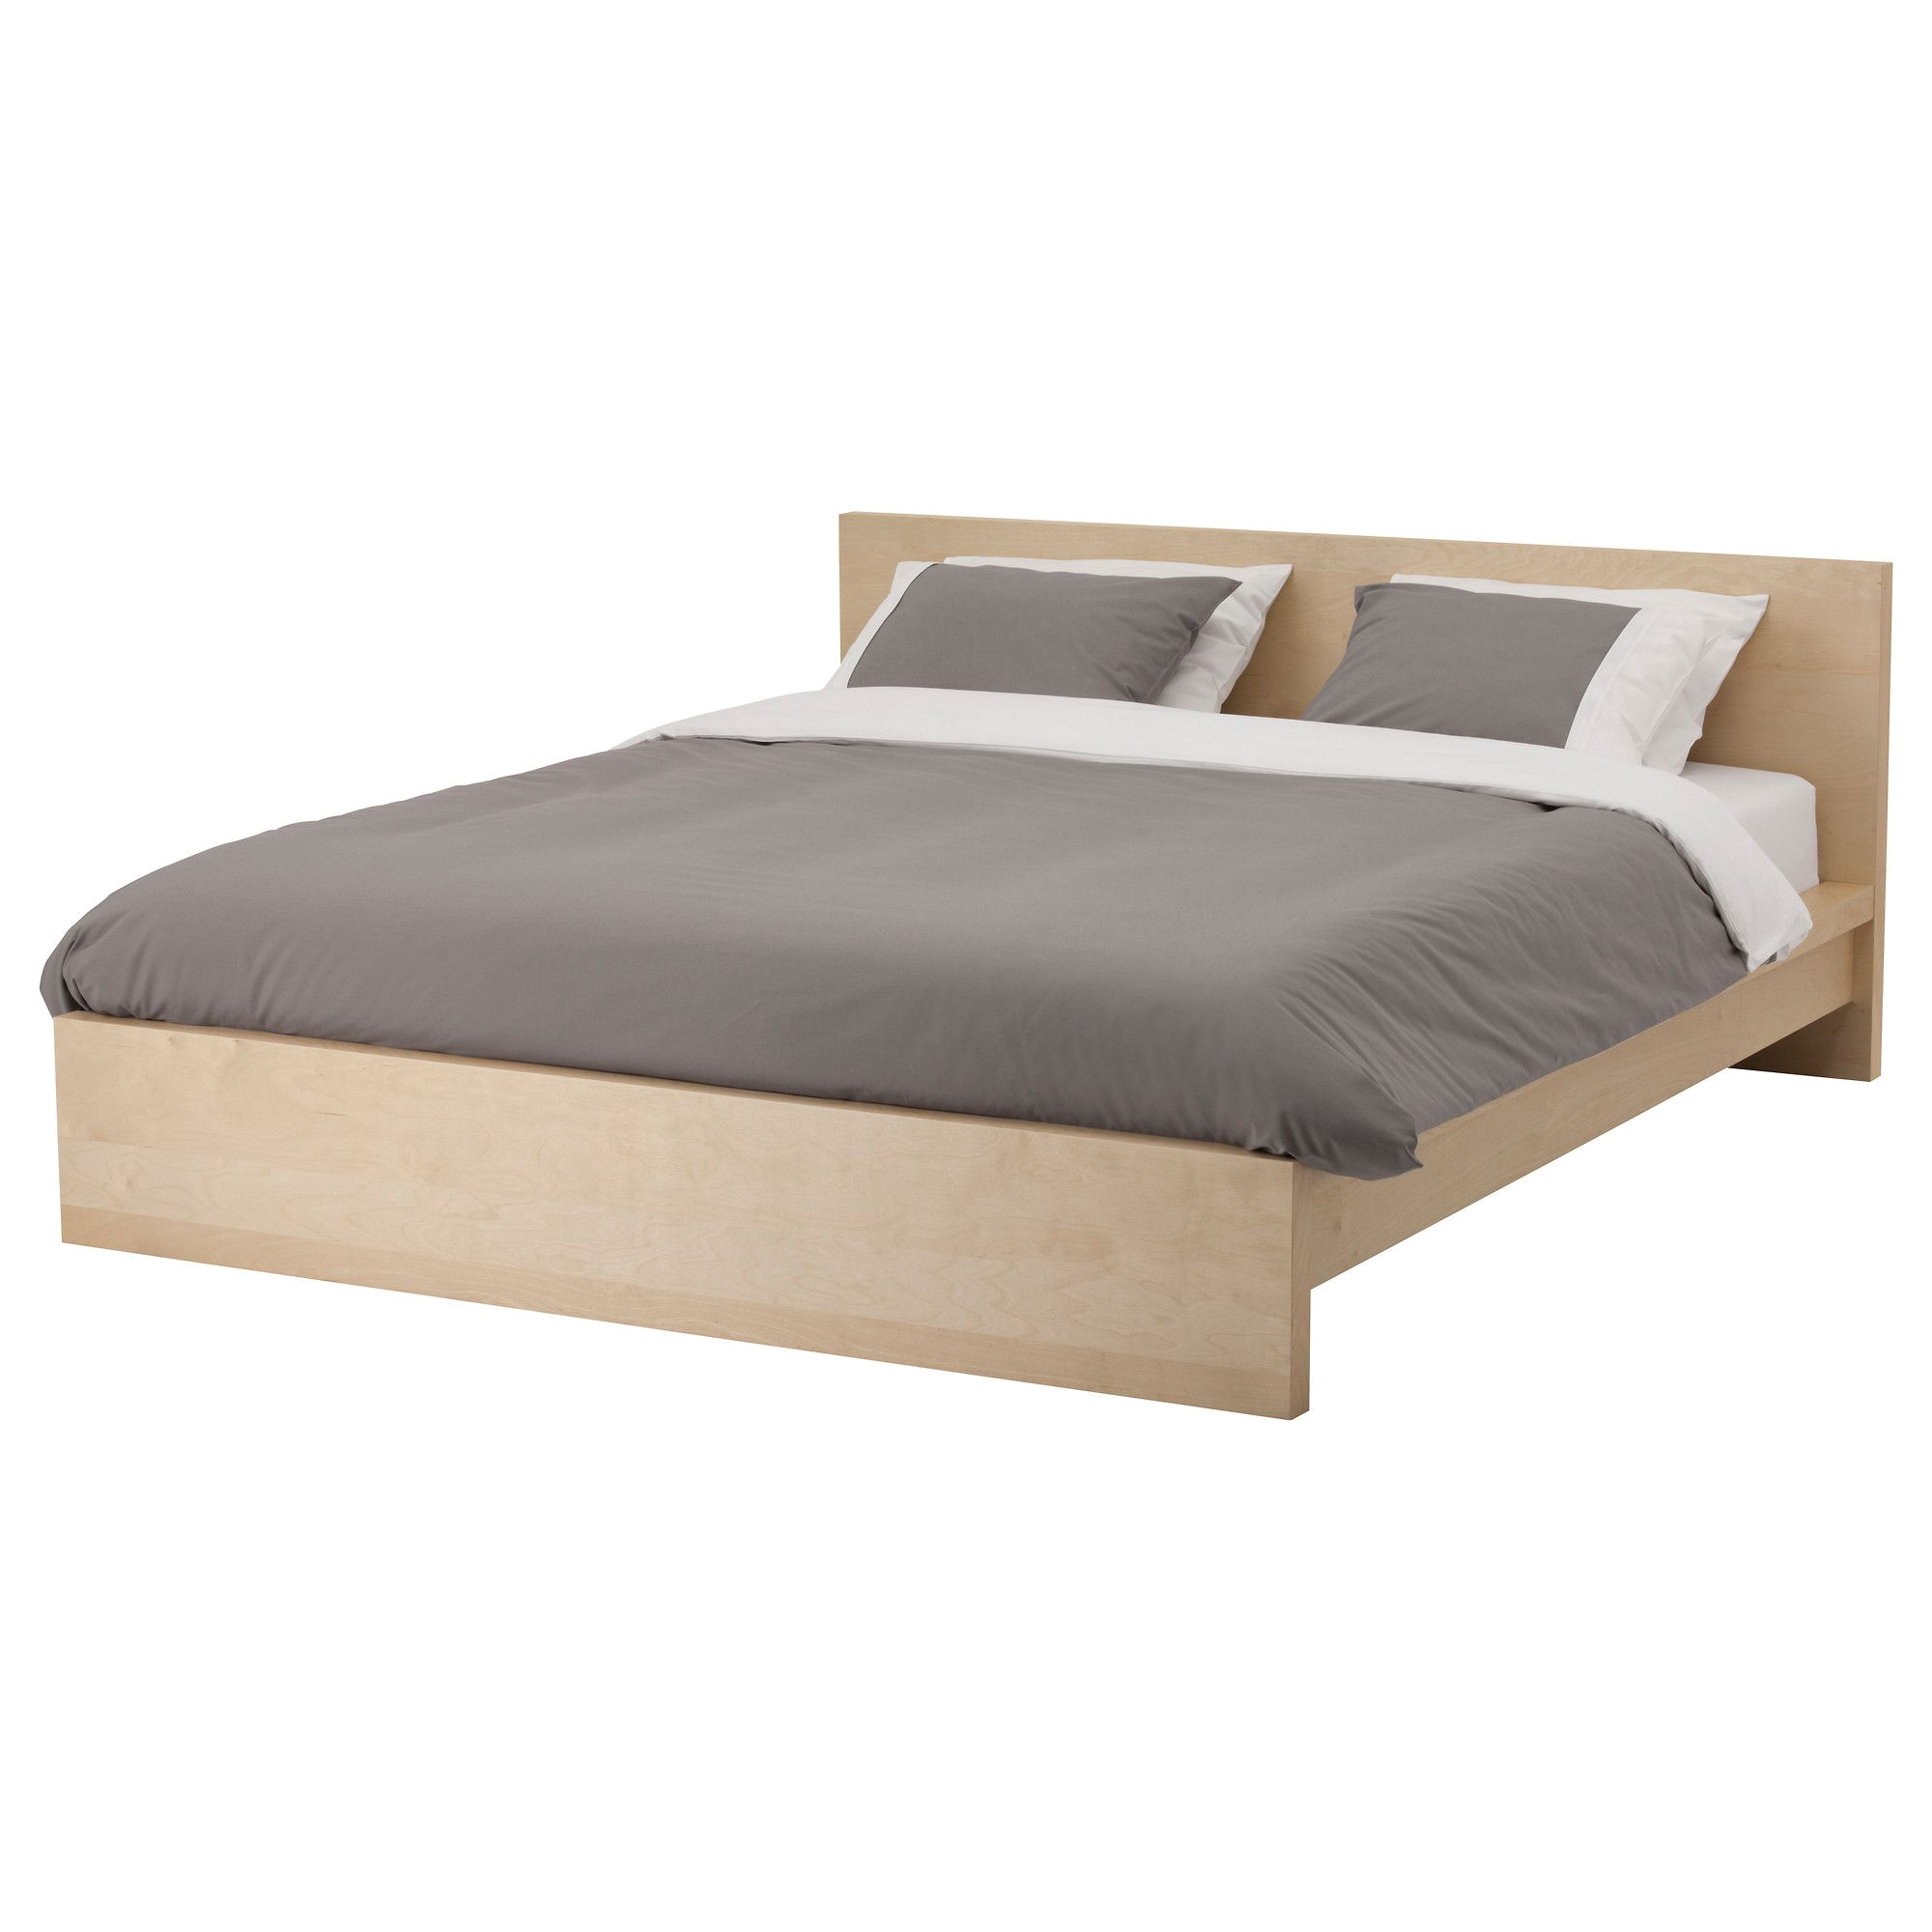 malm bed frame low queen ikea